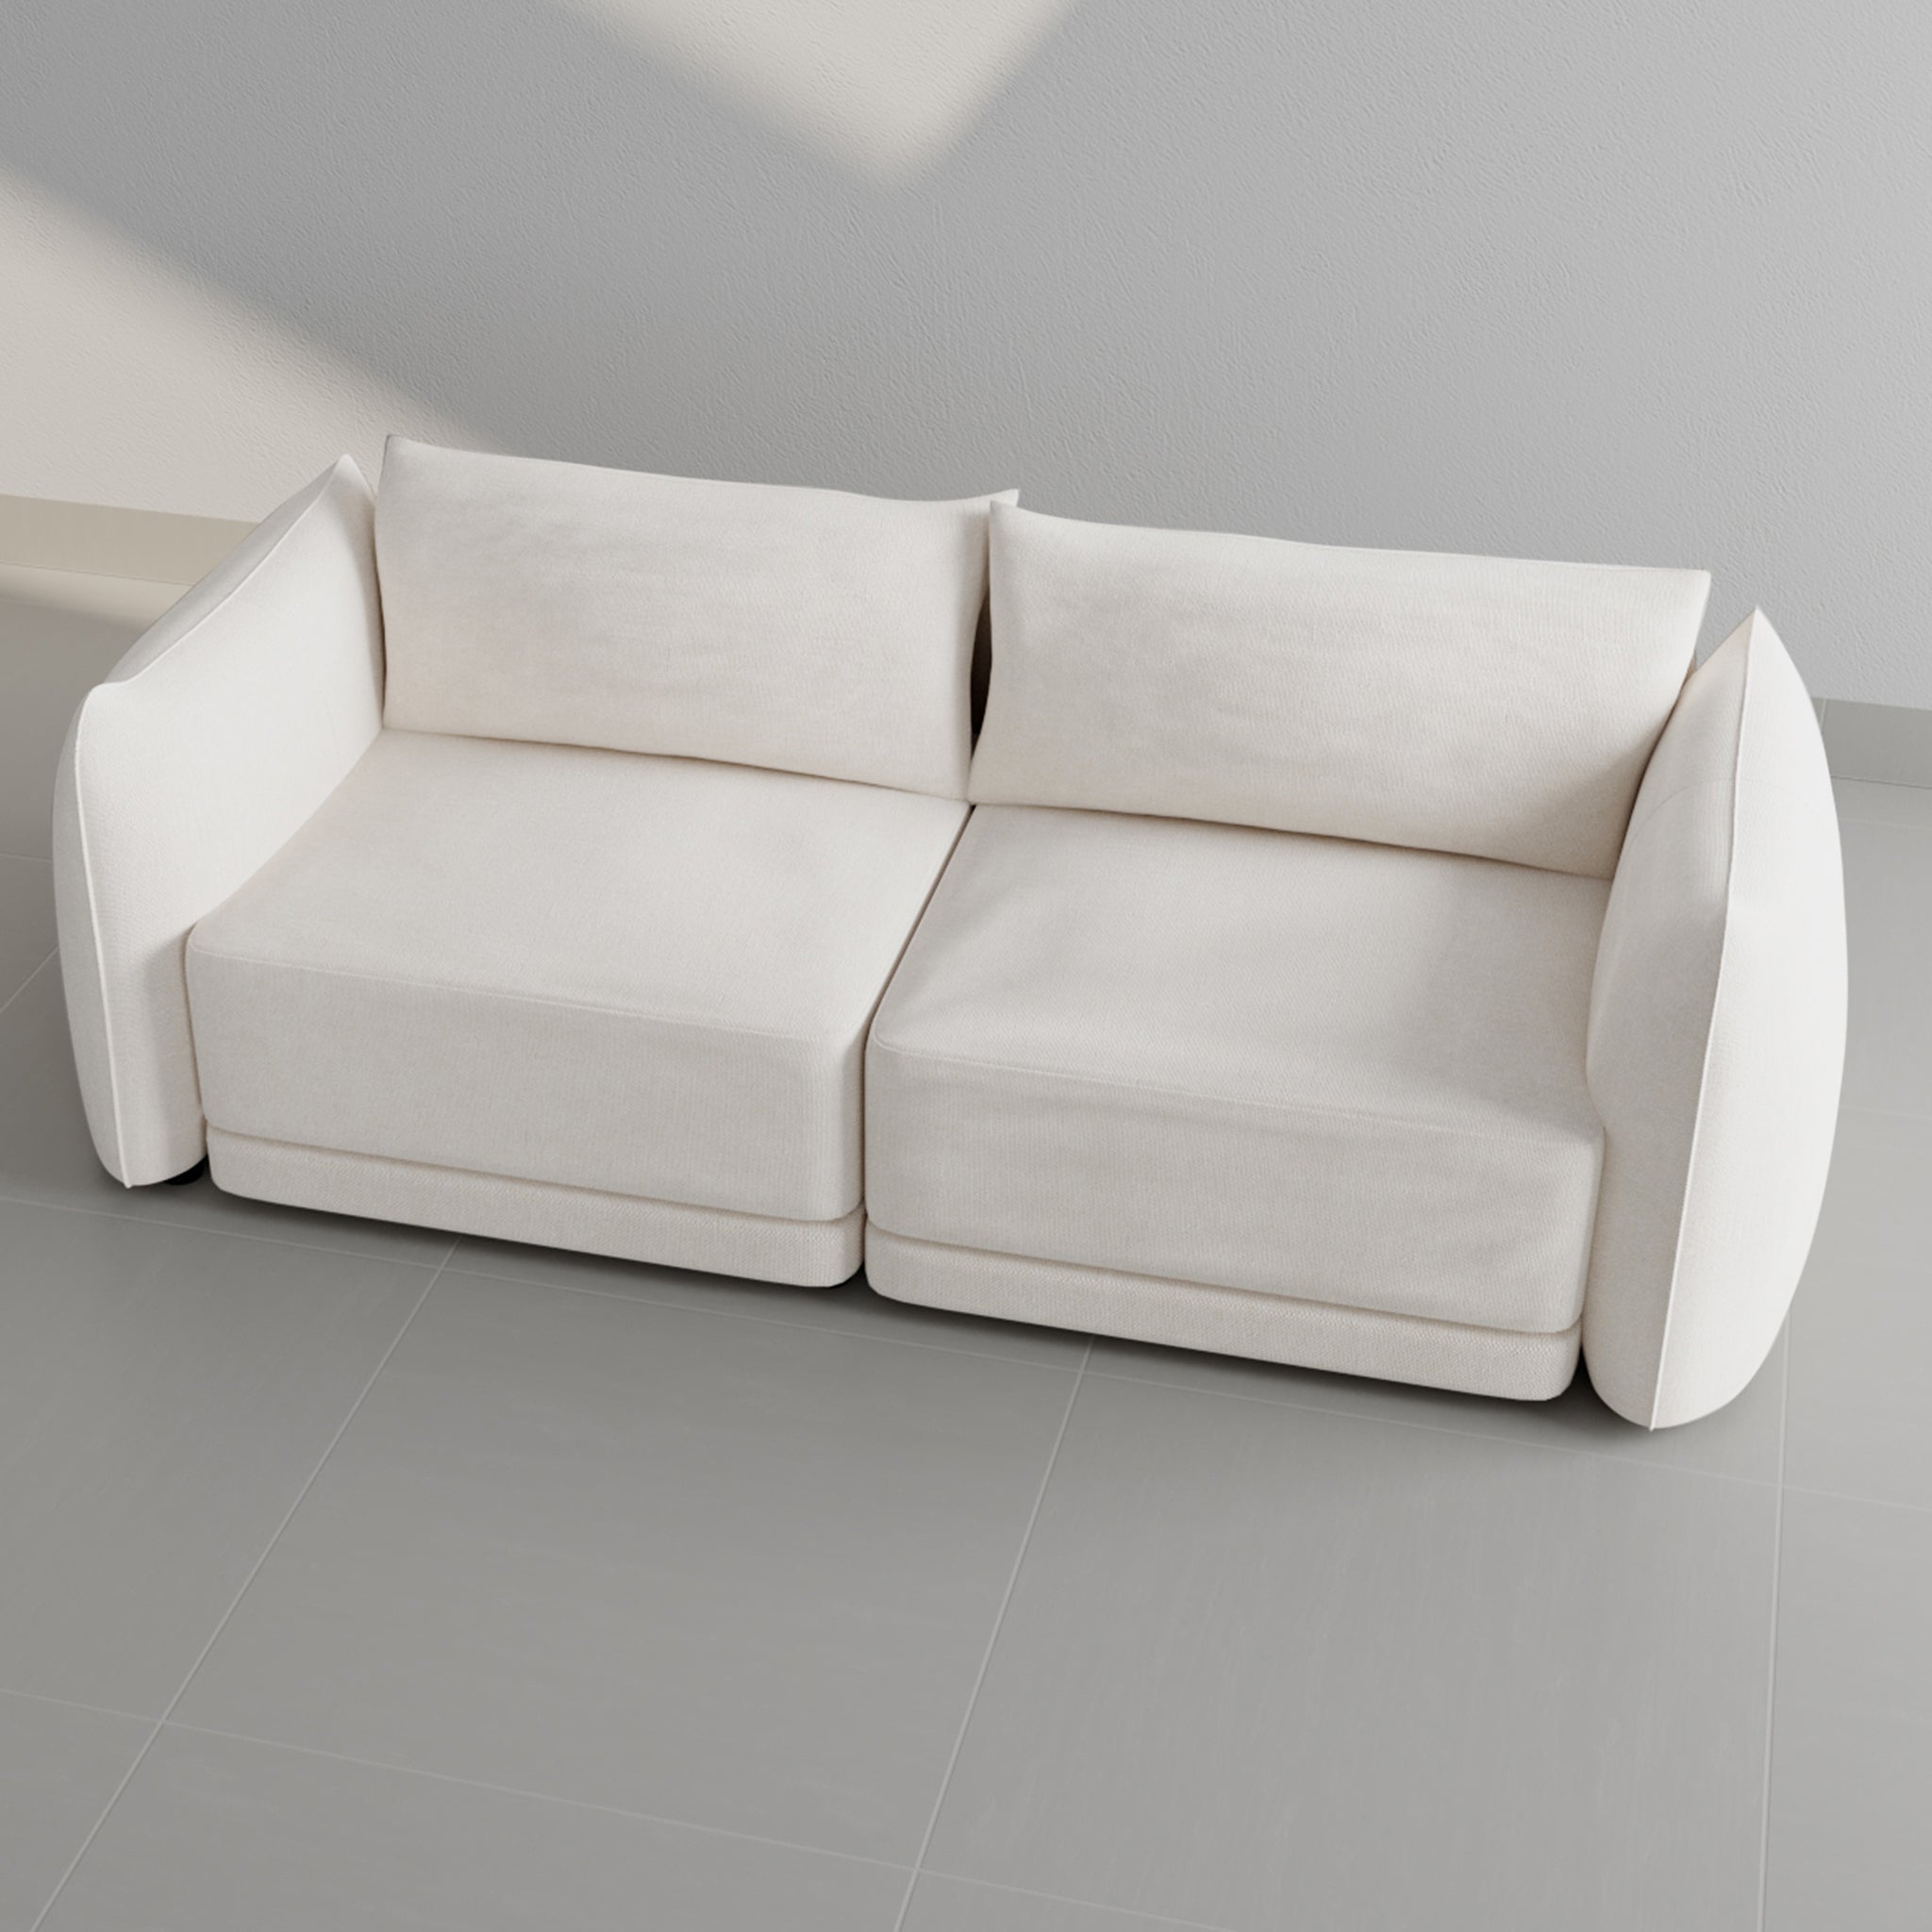 Top view of a modern white sofa with a minimalist design against a gray tiled floor, showcasing its clean lines and elegant structure.